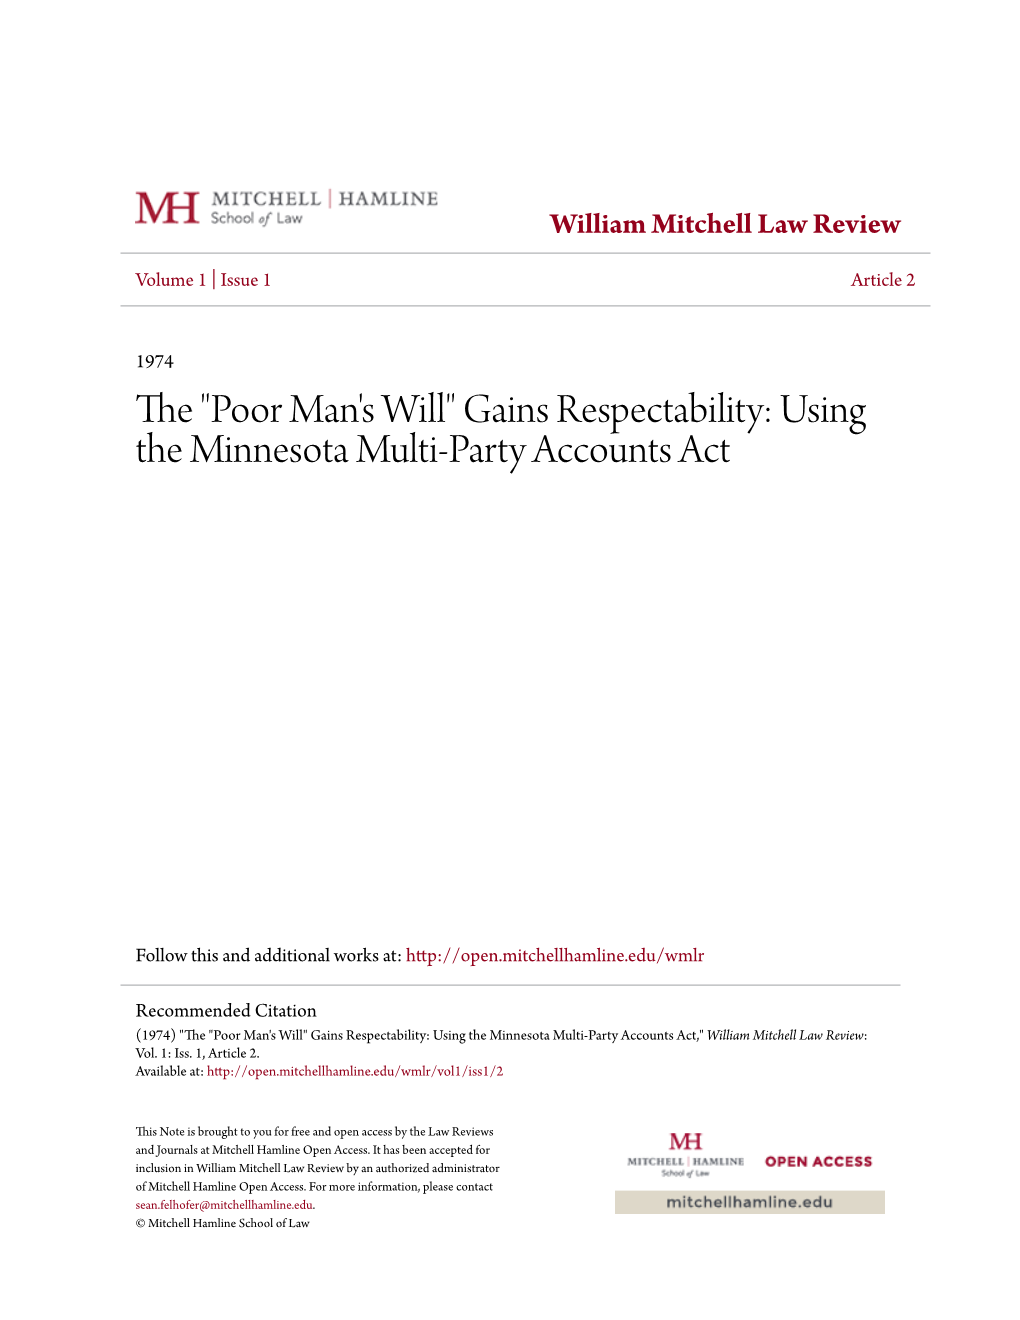 Gains Respectability: Using the Minnesota Multi-Party Accounts Act